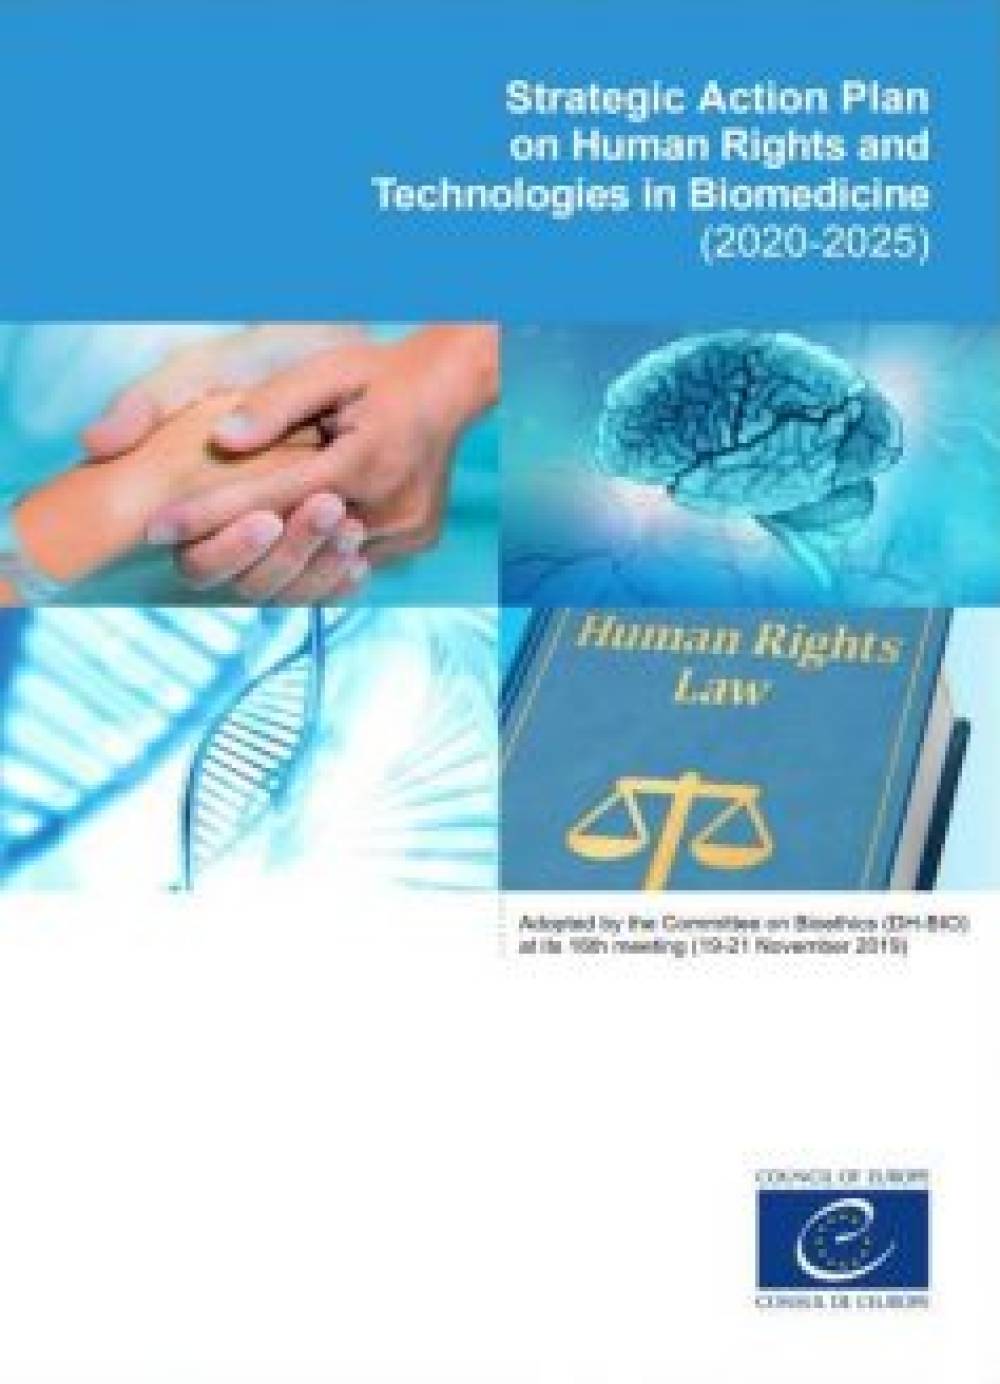 The Council of Europe adopted a new Strategic Human Rights Action Plan in biomedicine, covering the years 2020-2025